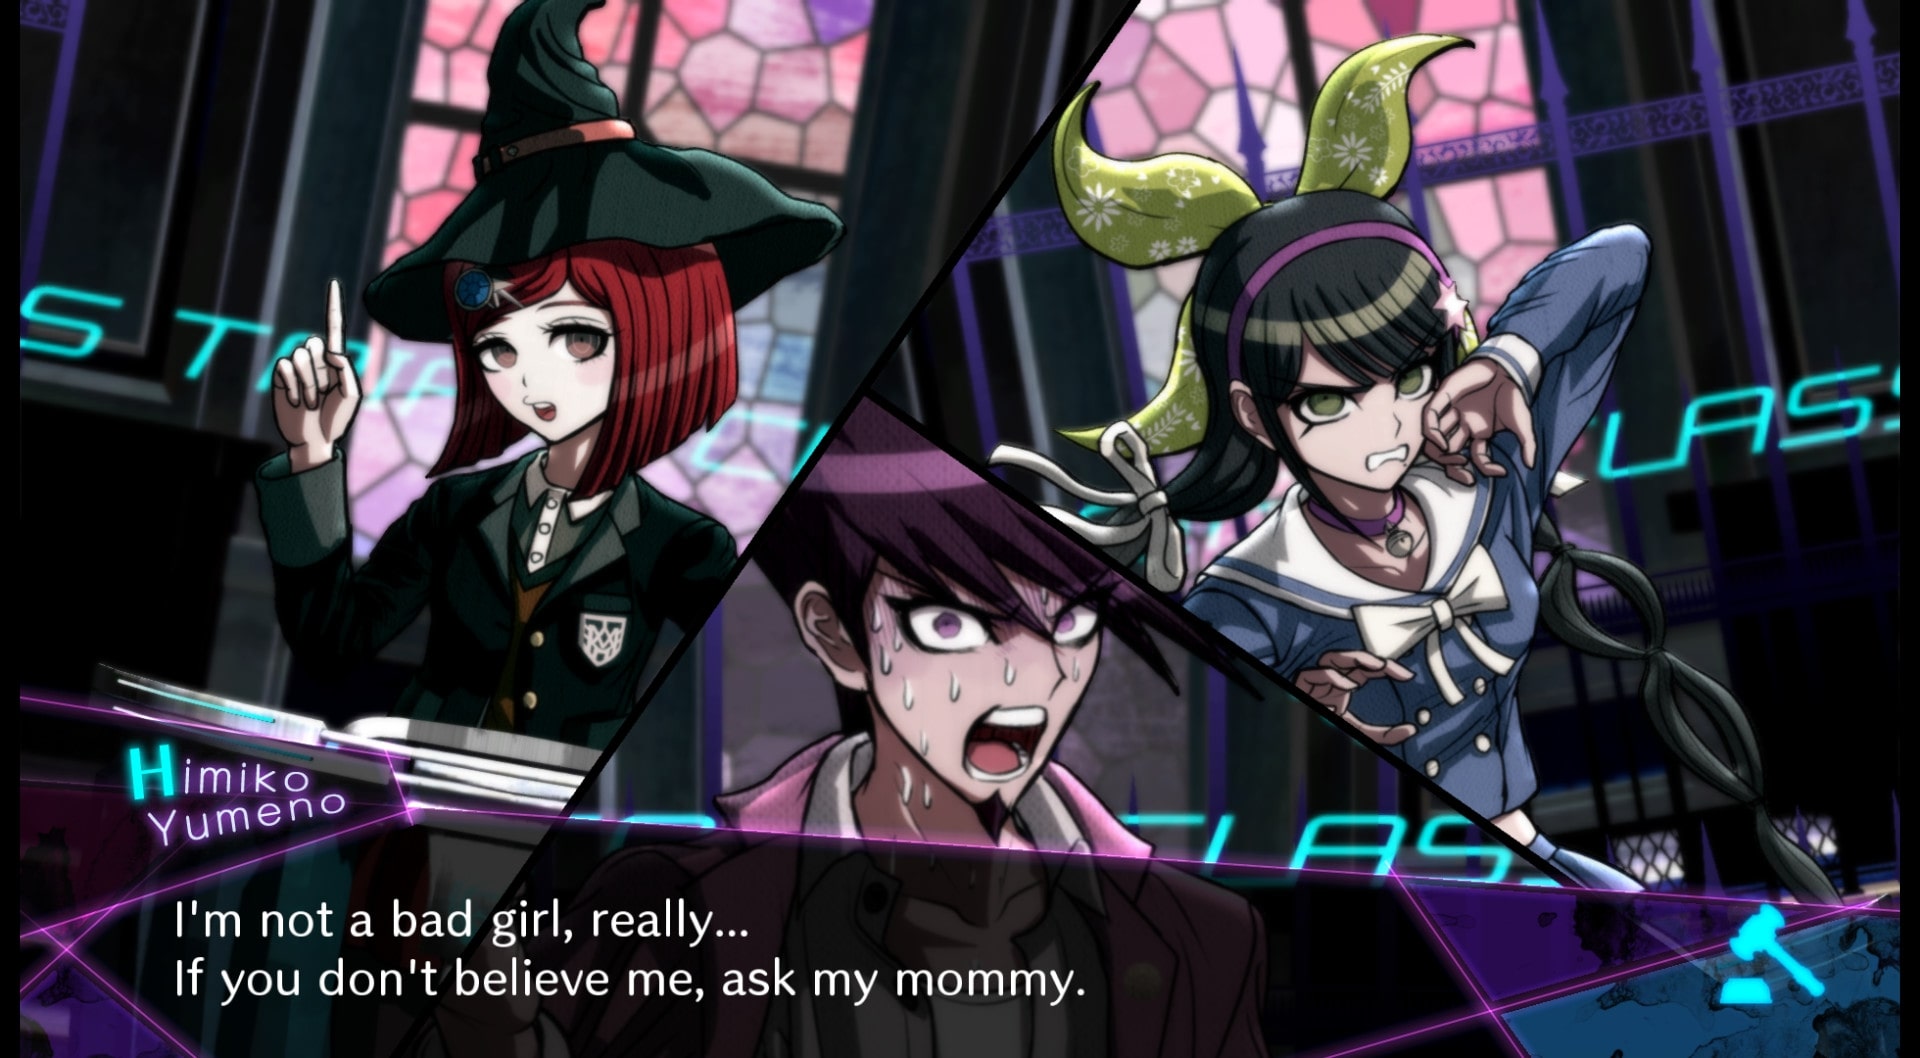 Himiko quotes her mom